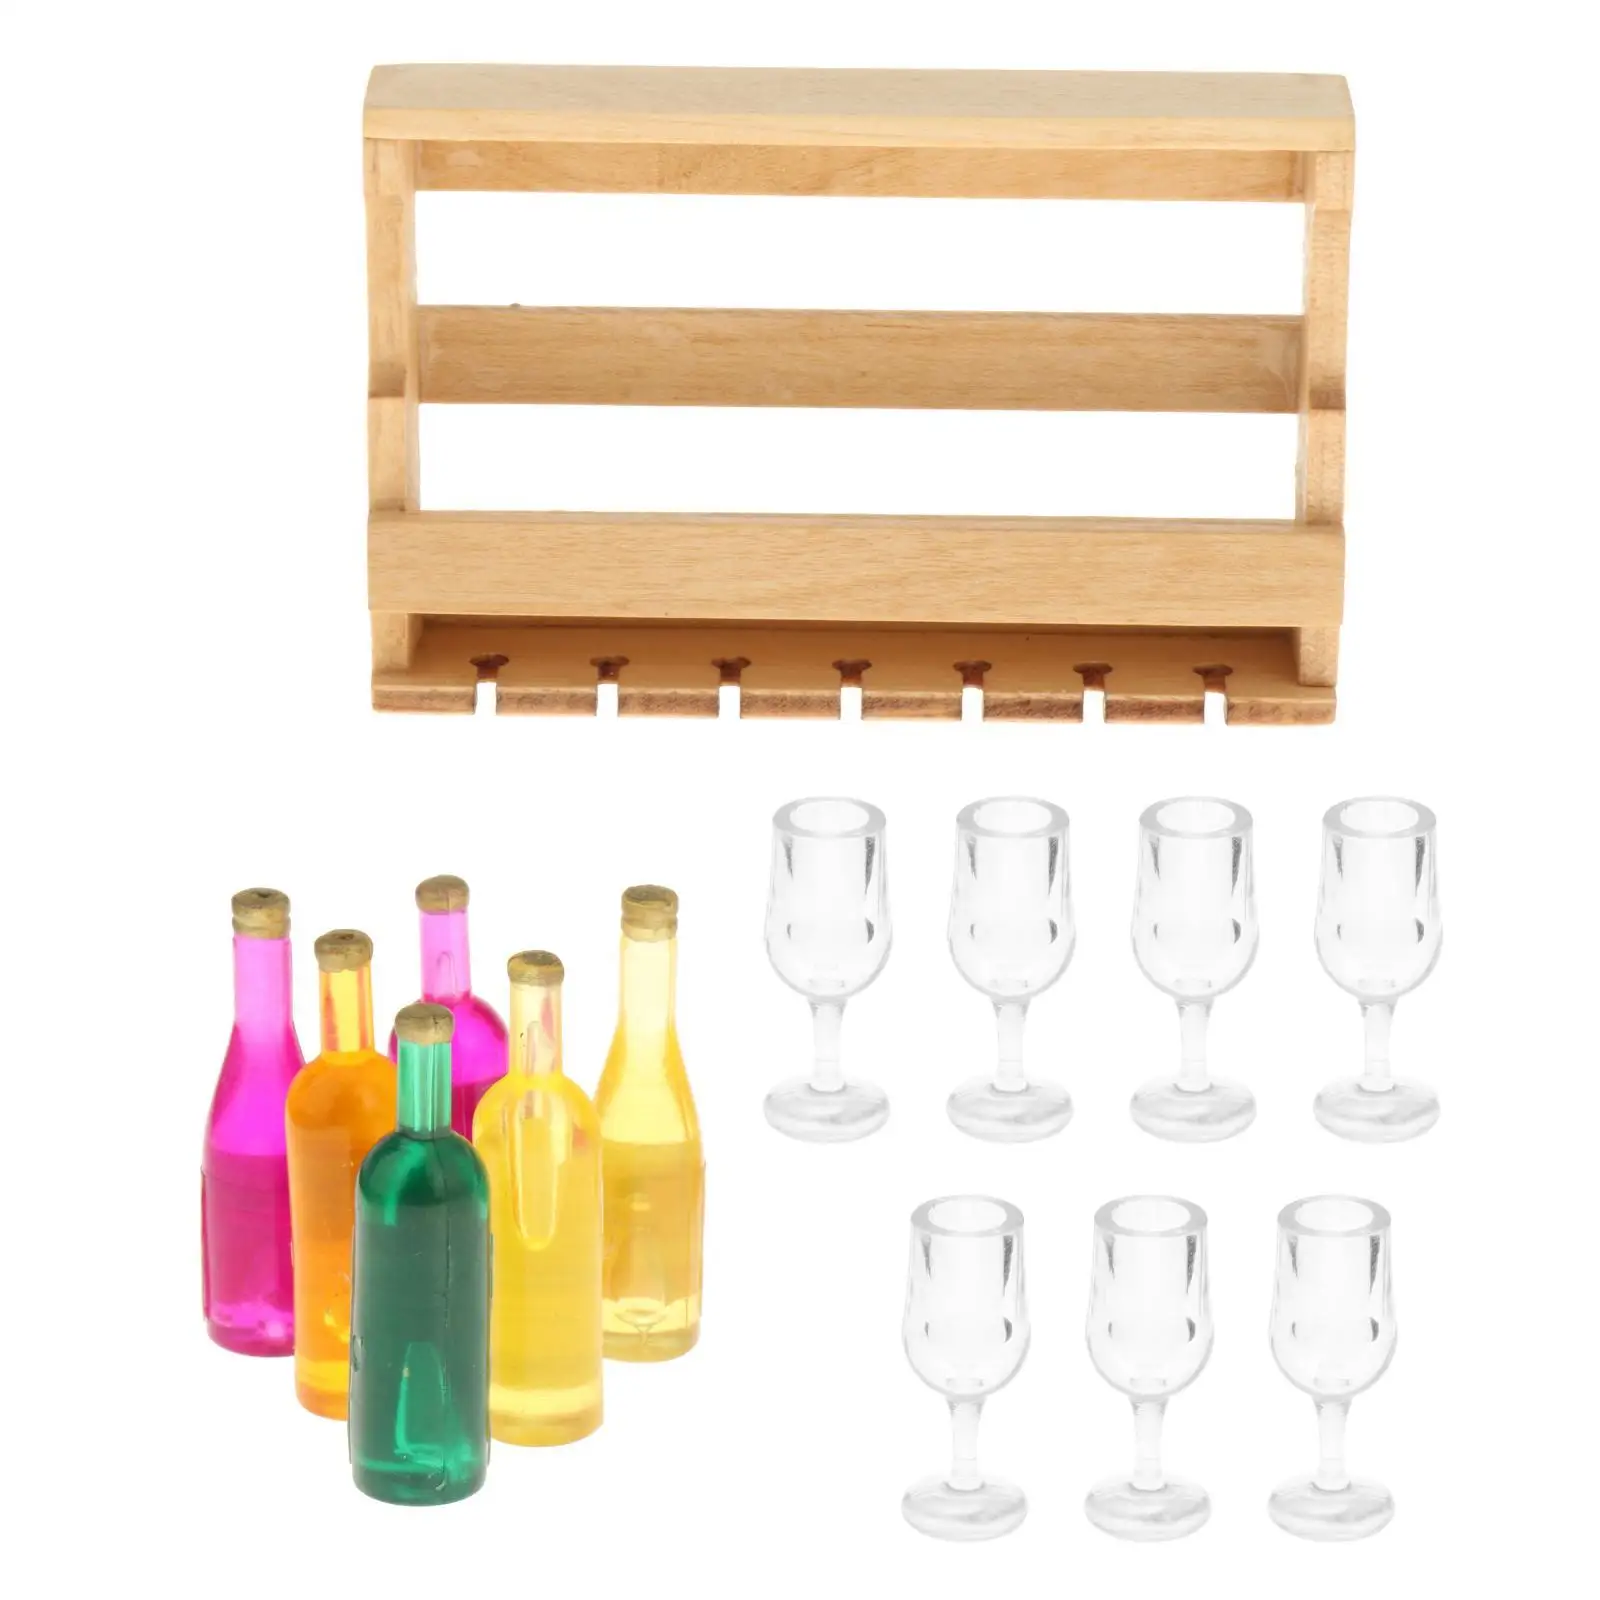 14 Pieces 1:12 Wine Rack with Bottles and Glass Cup Toys Life Scene Furniture Pretend Play for Kitchen Bar Living Room Decor